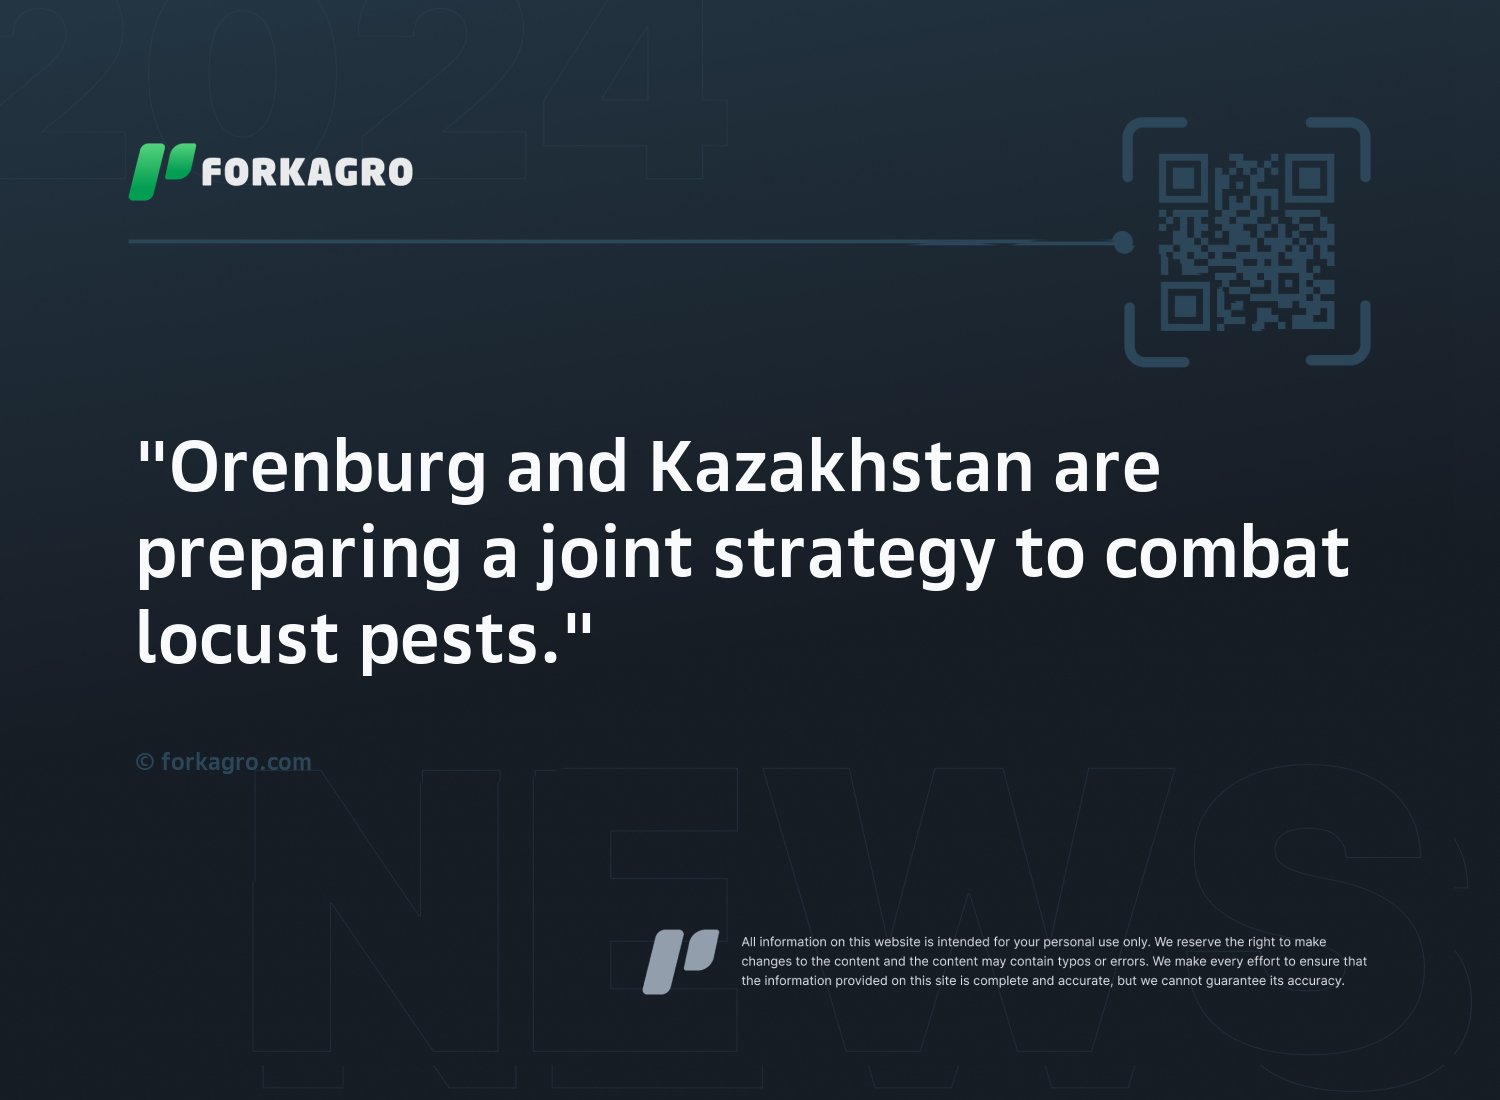 "Orenburg and Kazakhstan are preparing a joint strategy to combat locust pests."